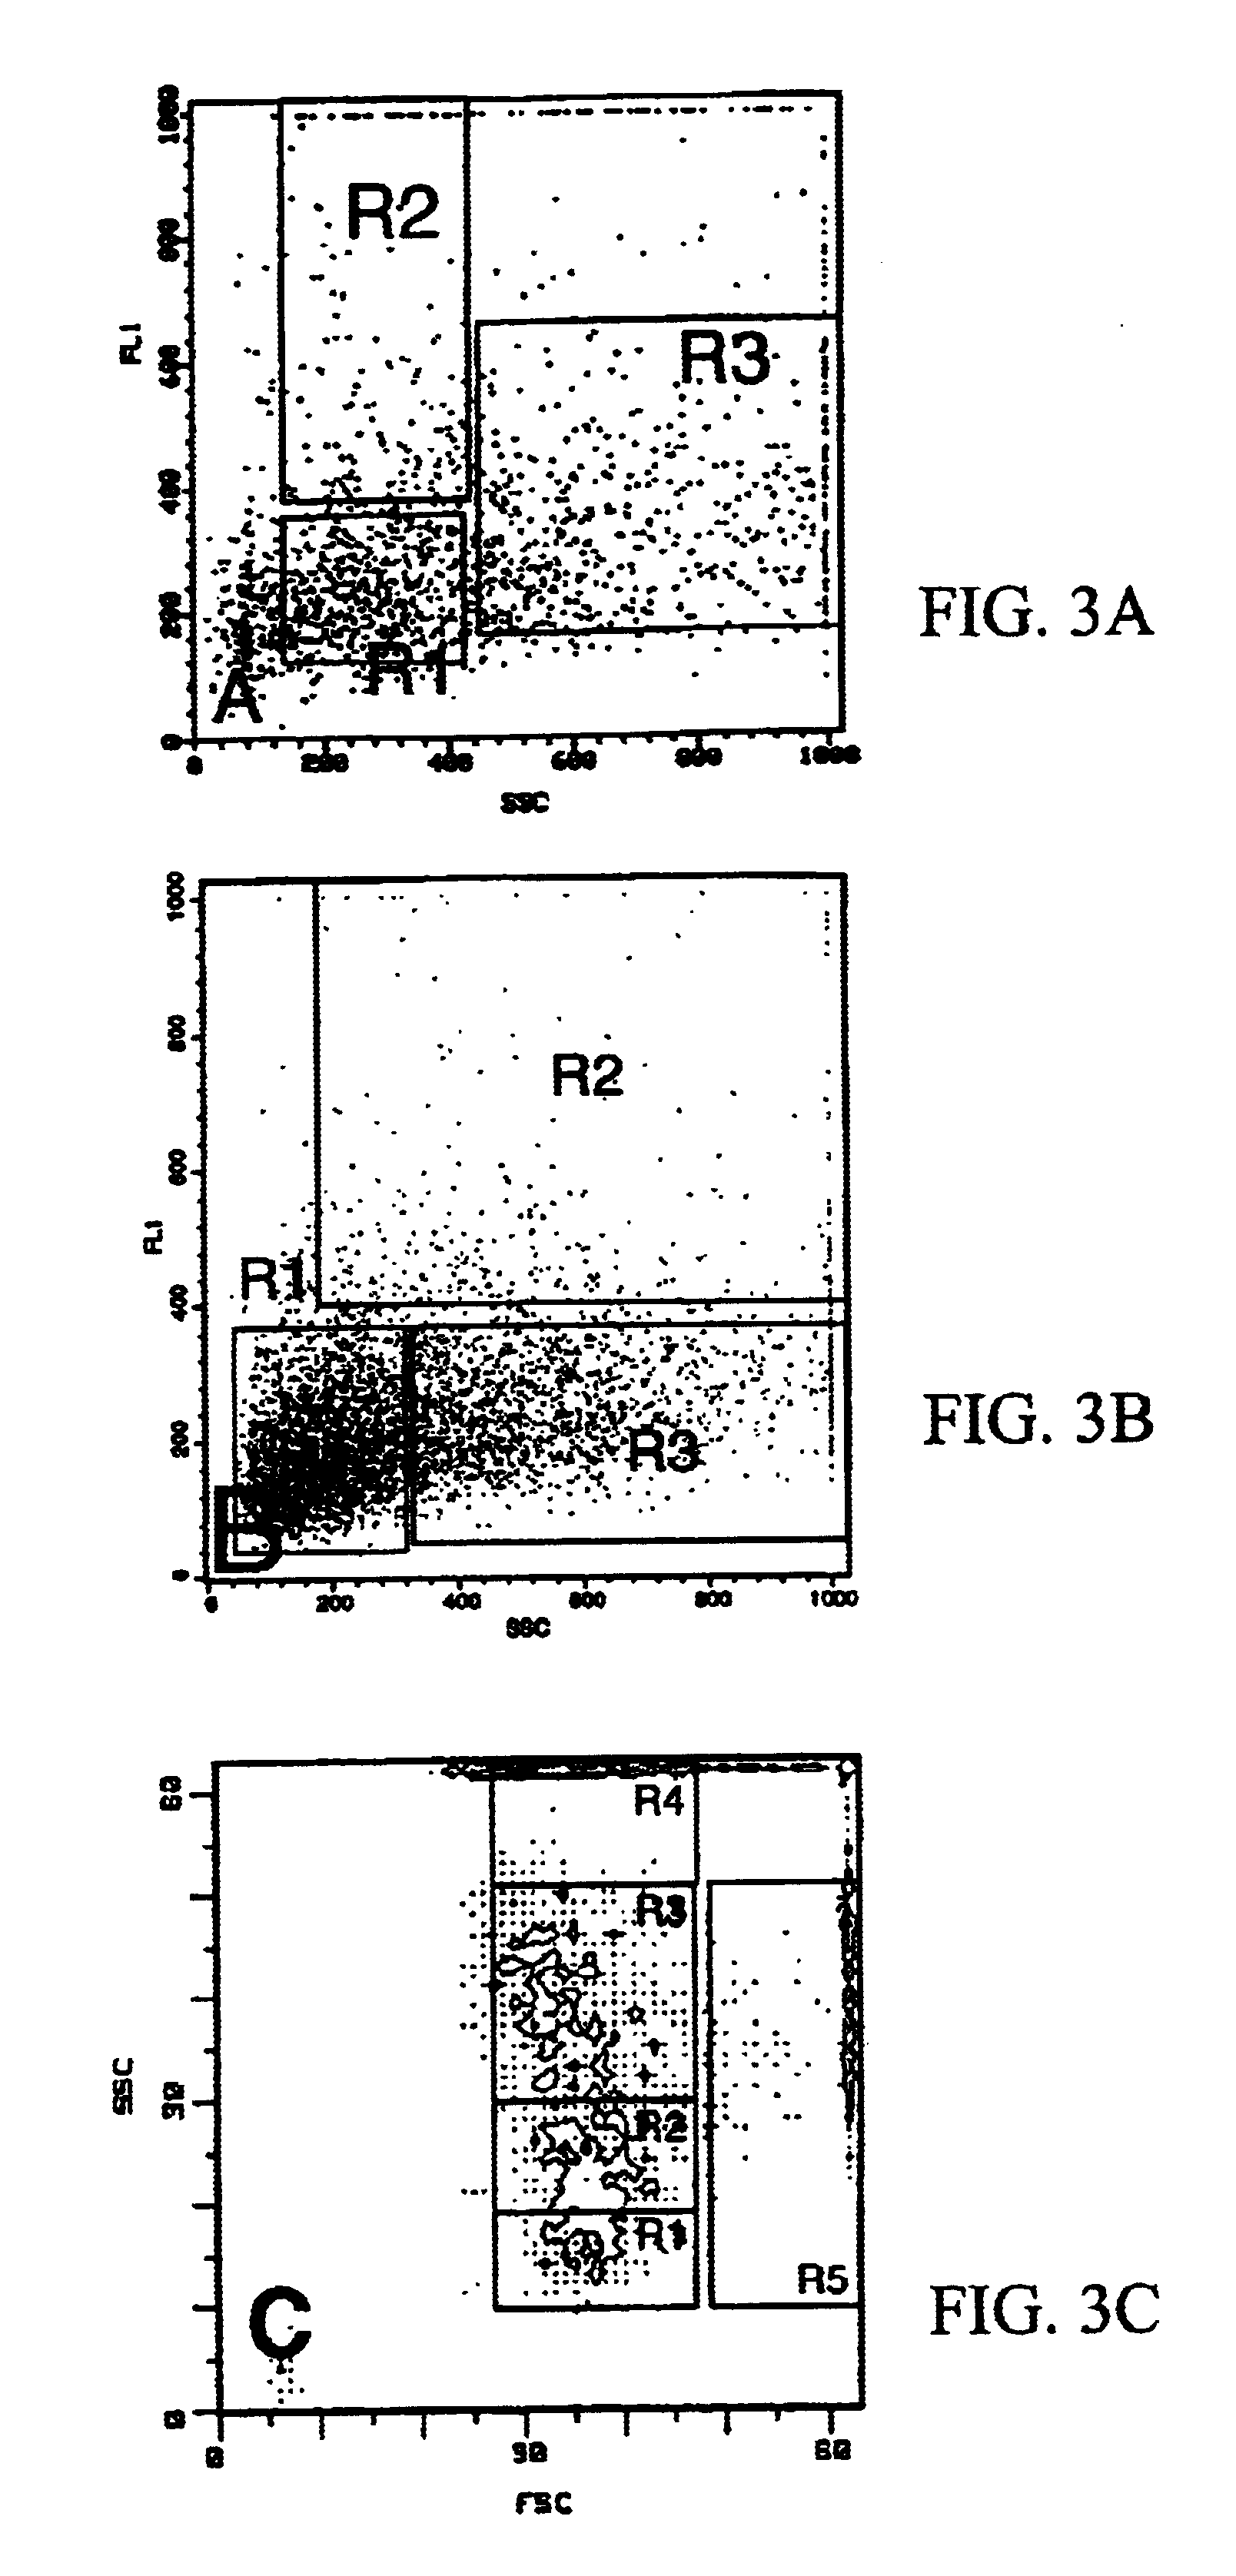 Method for producing preparations of mature and immature pancreatic endocrine cells, the cell preparation and its use for treatment of diabetes mellitus